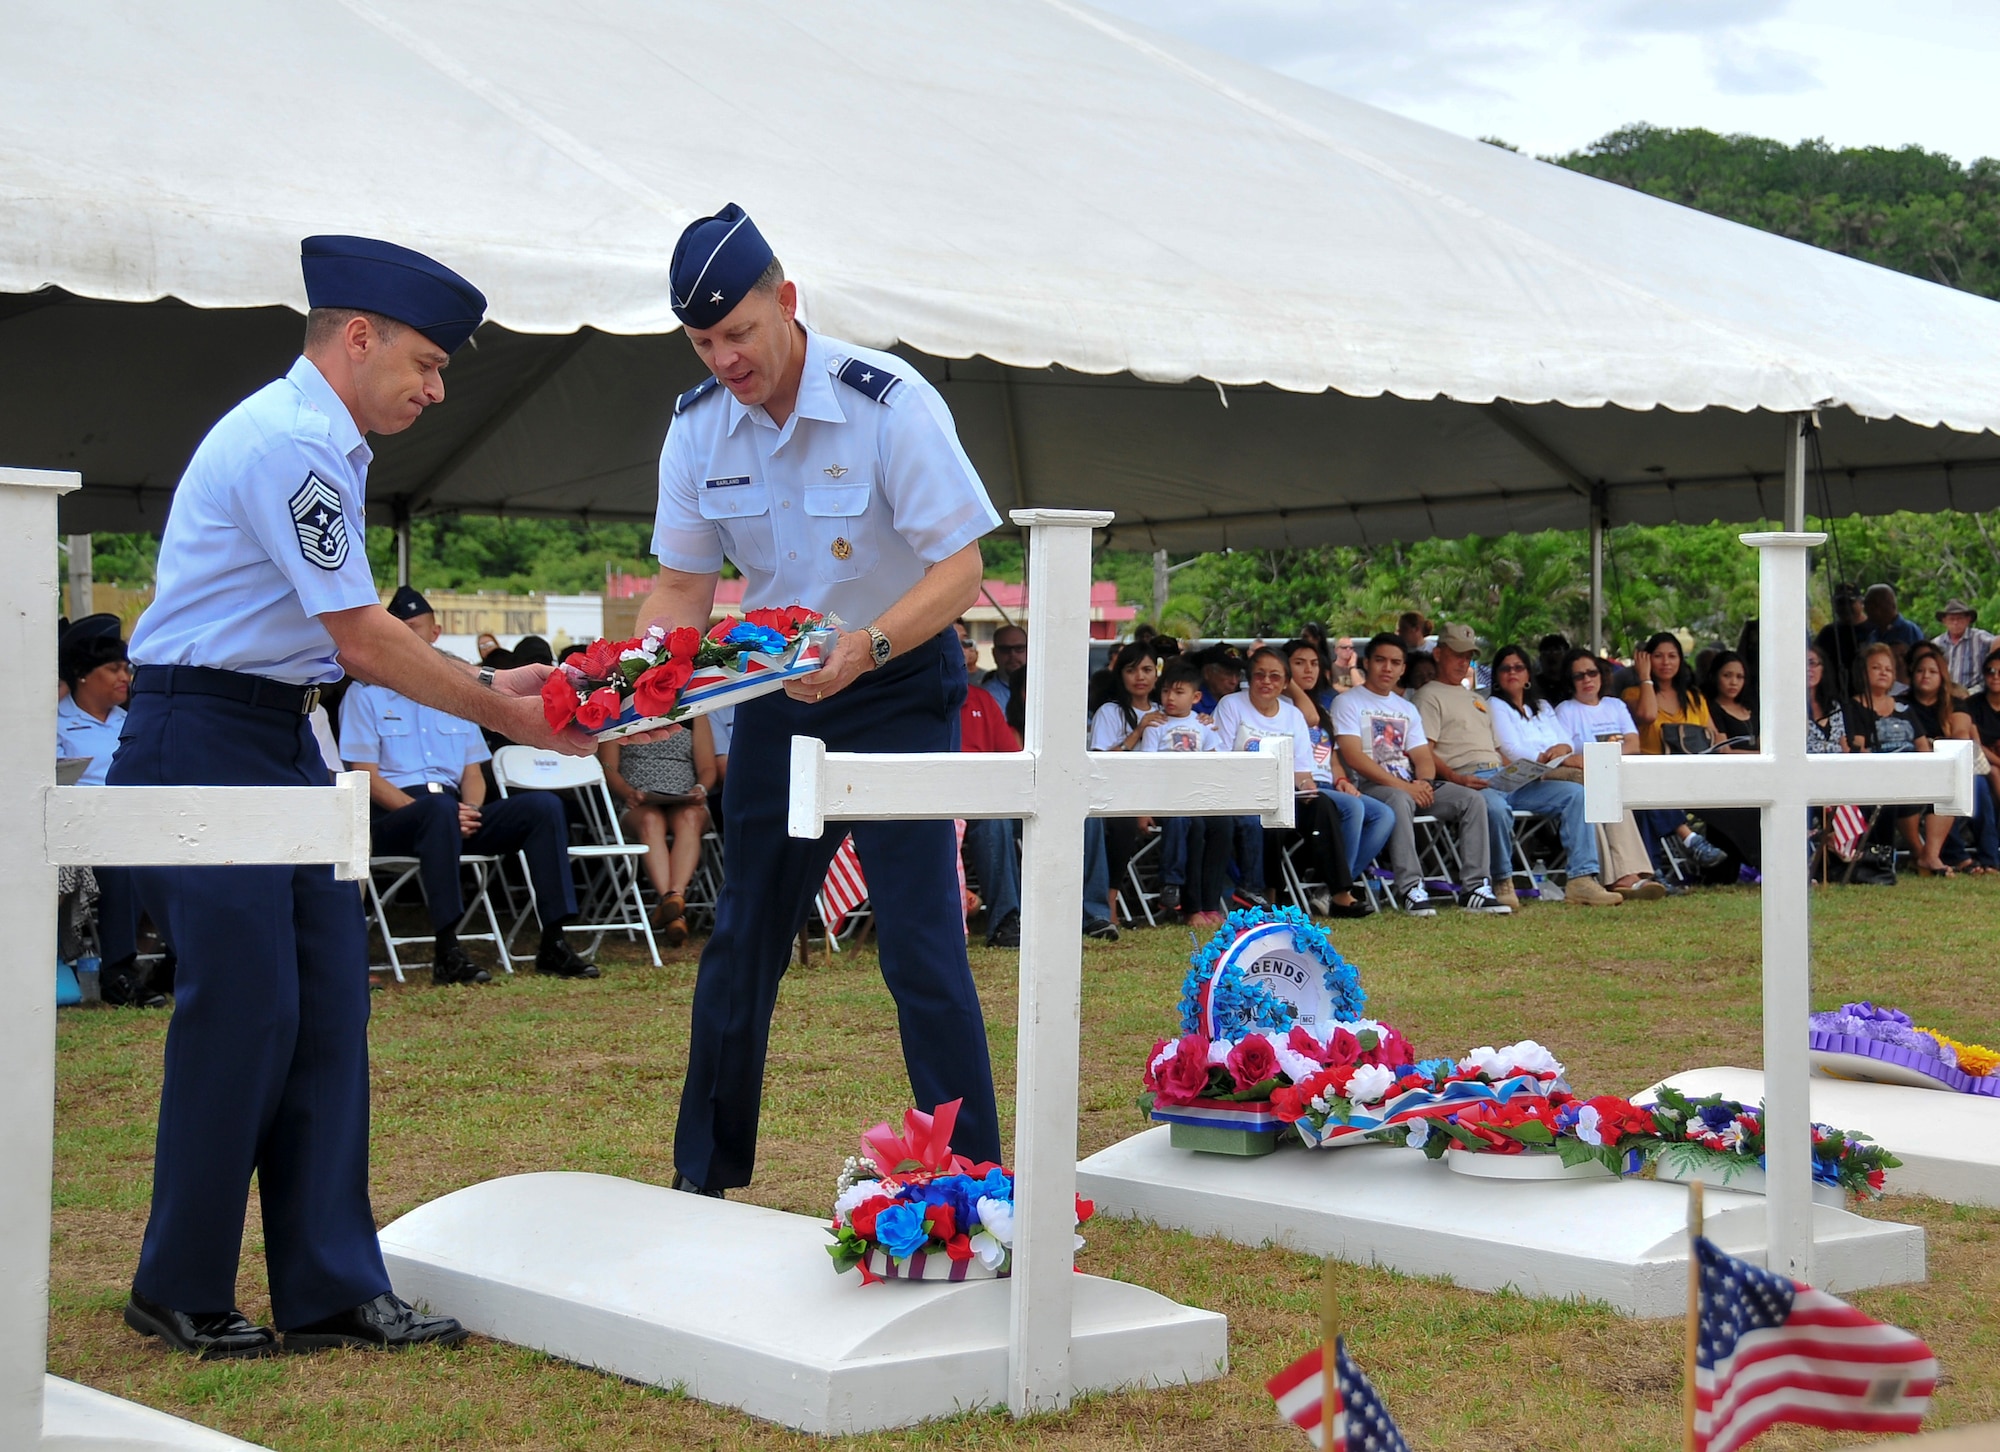 Brig. Gen. Steven Garland, 36th Wing Commander, and Chief Master Sgt. James Slisik, 36th Wing Command Chief, lay a wreath on a grave marker to honor fallen service members who were killed during Operation Enduring Freedom during the Memorial Day Ceremony at the Guam Governor’s Complex in Hagåtña, May 26, 2014. Various veterans’ organizations laid wreaths on the markers, which were set up to honor veterans who died in conflicts from World War I through Operation Enduring Freedom. (U.S. Air Force Photo by Staff Sgt. Brok McCarthy/Released)